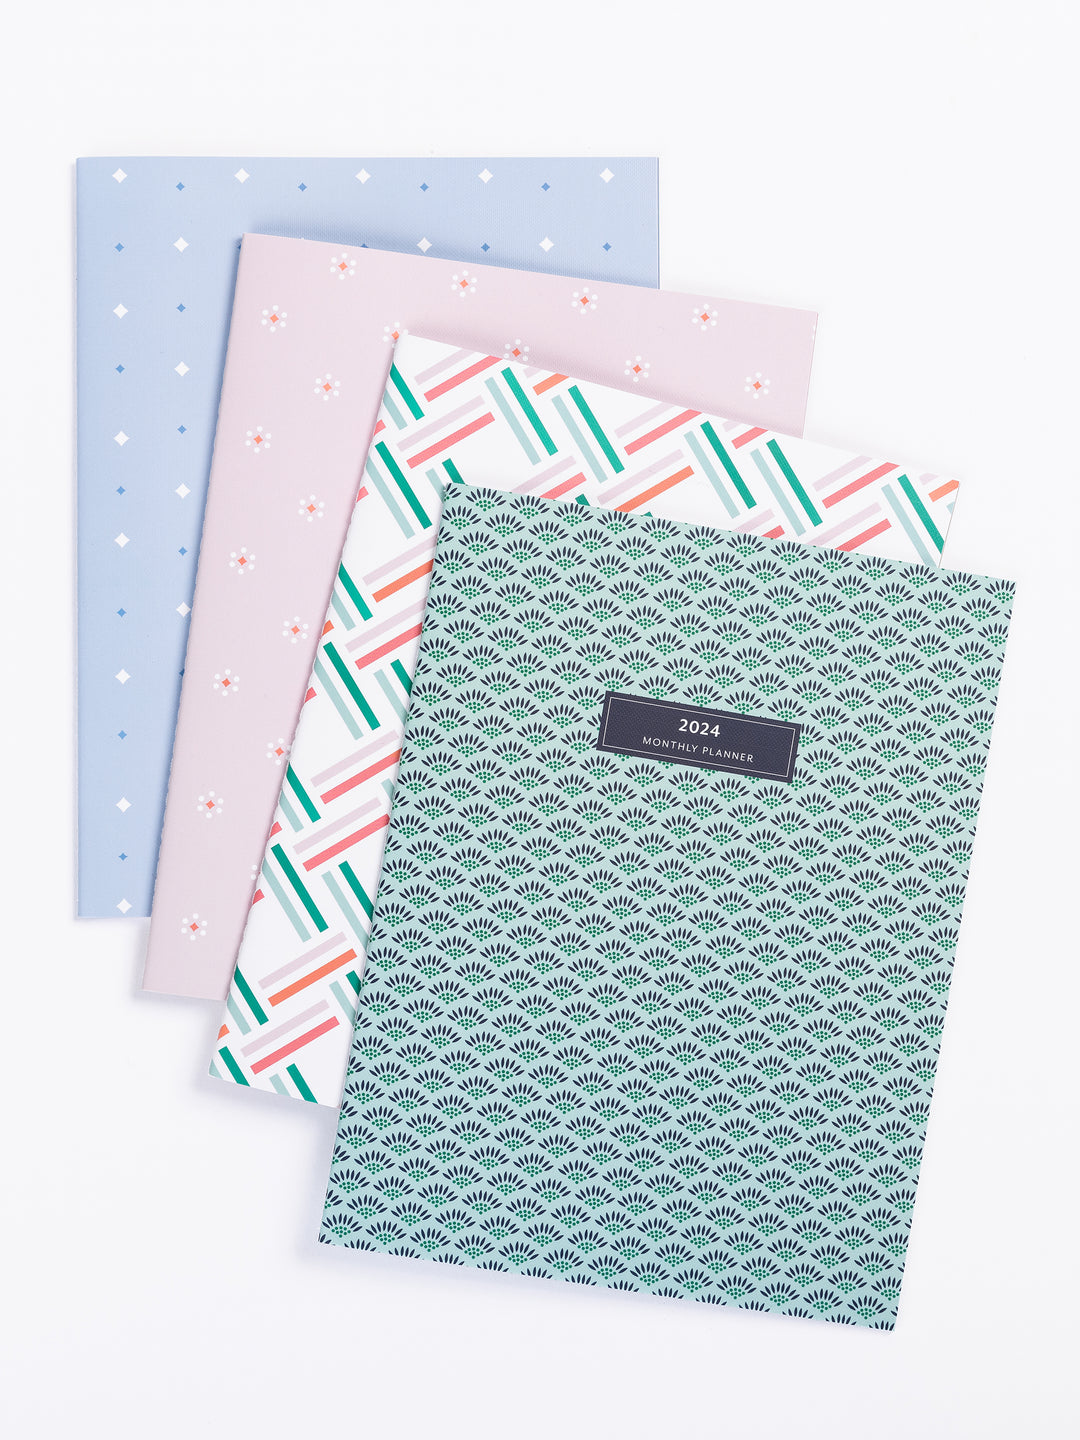 2024 Large Monthly Planner | Square Dance Pink & Green